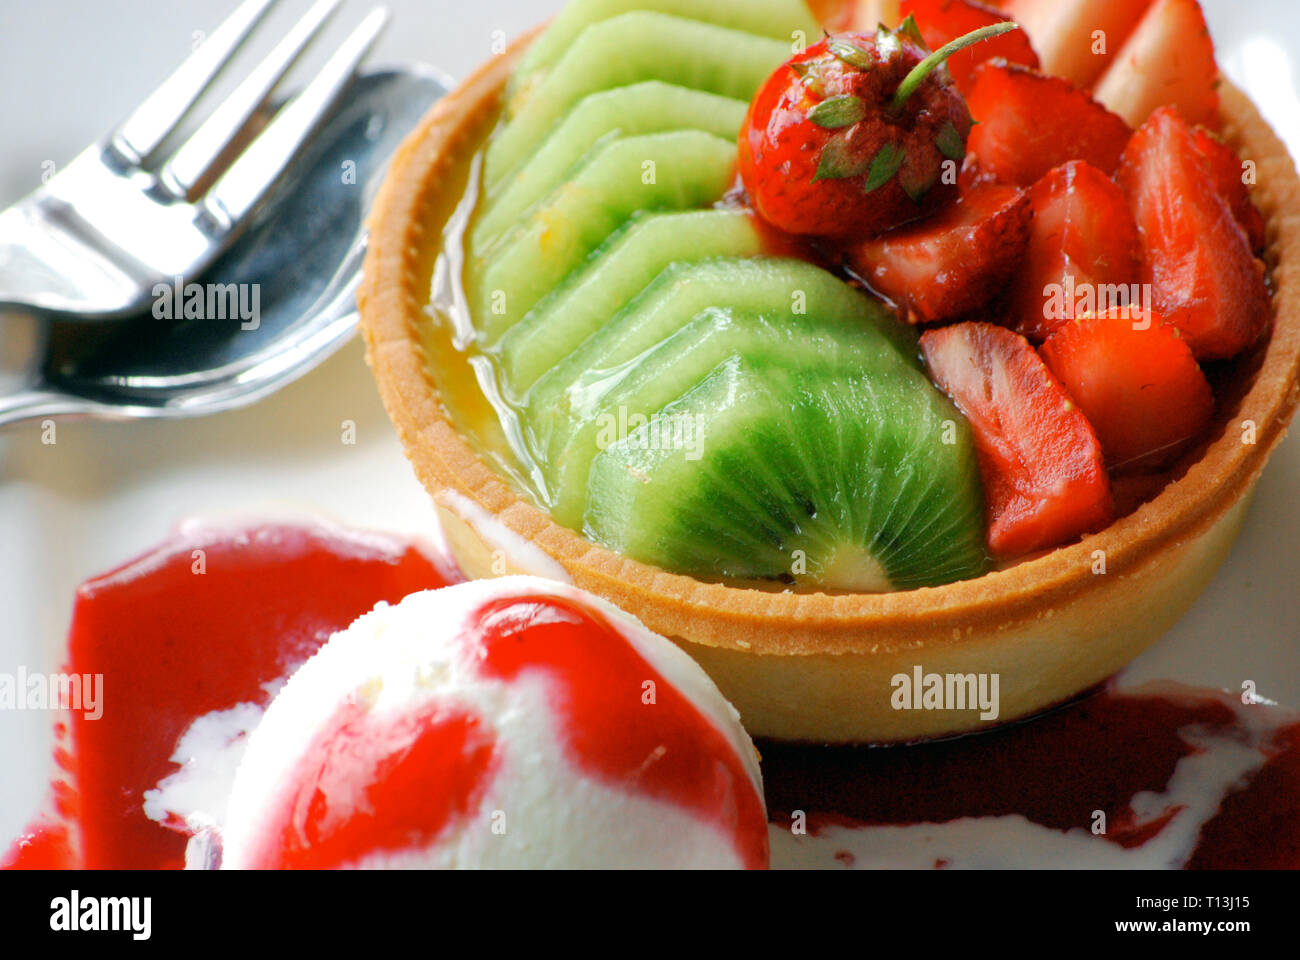 Sliced glistening Kiwi fruit and Strawberries in a bowl, with a scoop ice-cream, Stock Photo